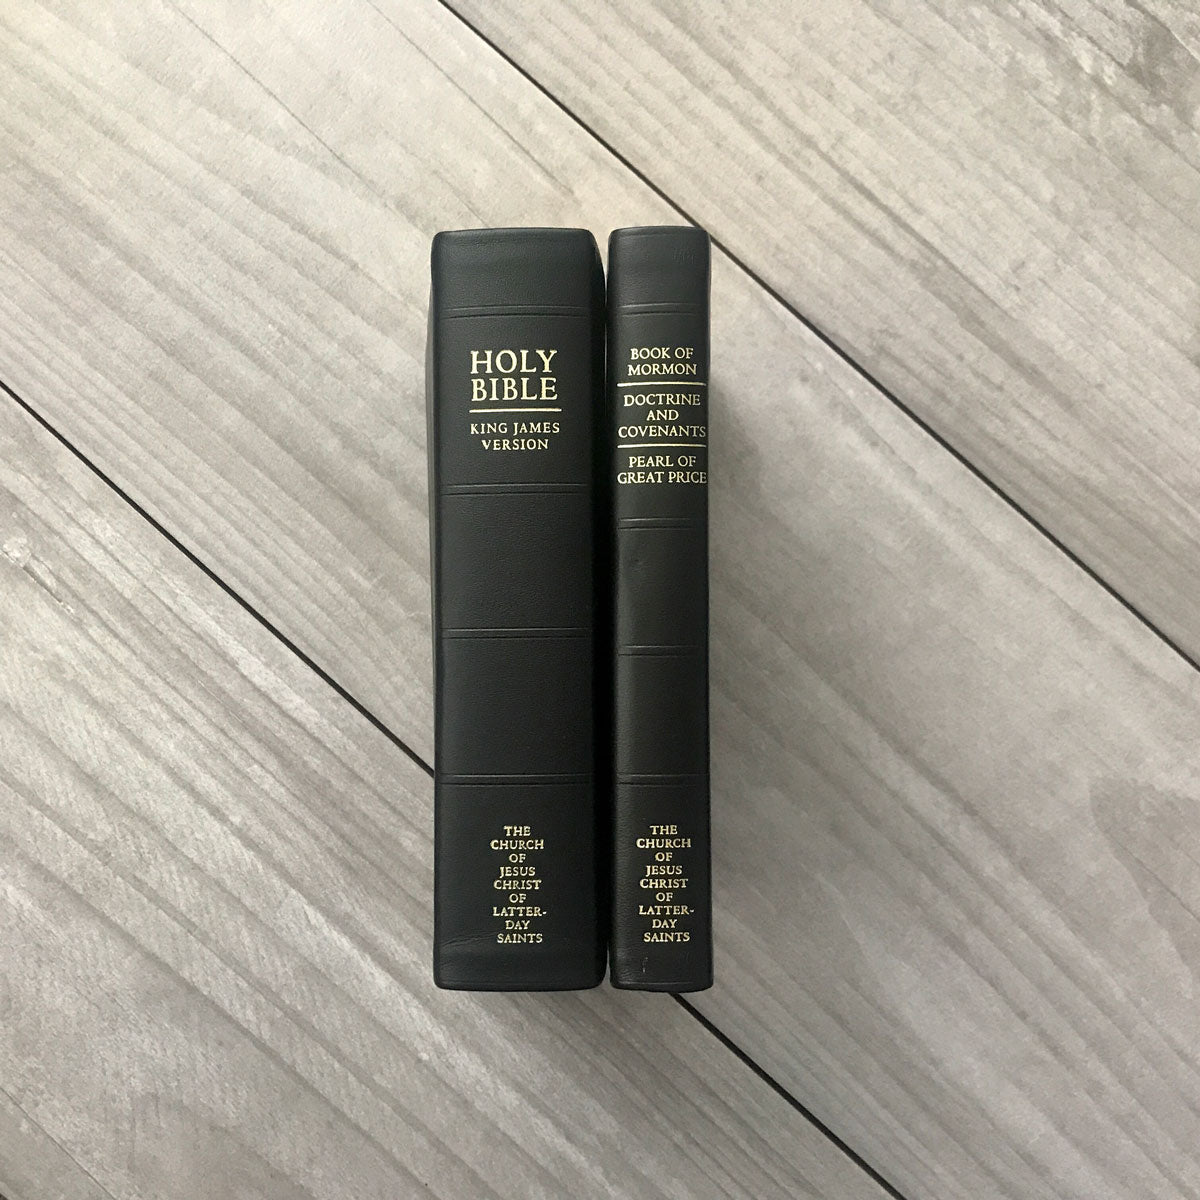 LDS Triple combination and Bible by Jessie Anne